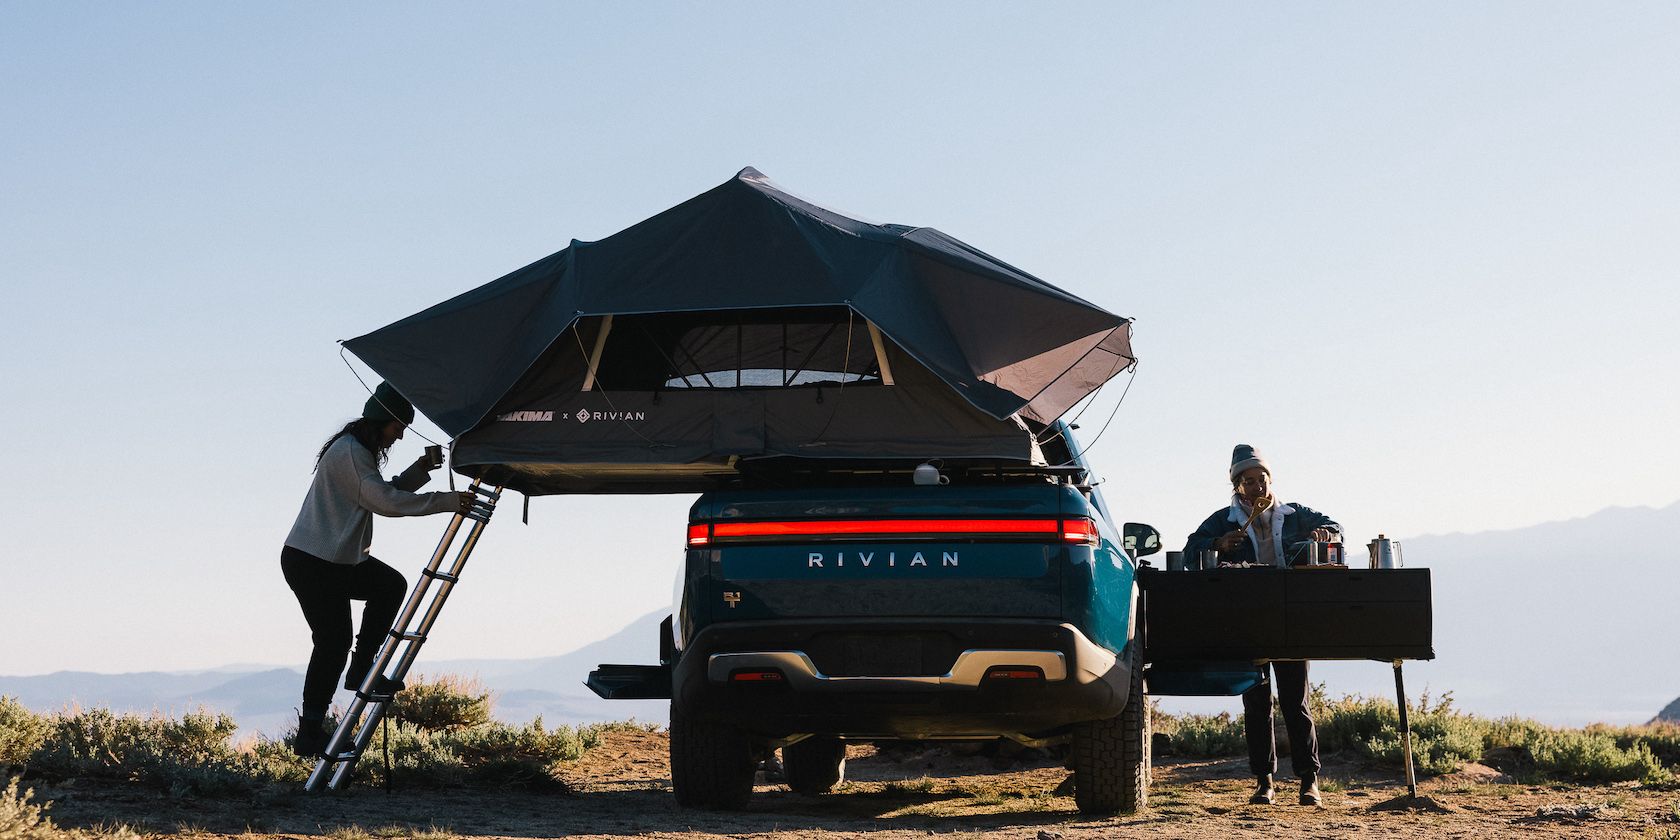 A blue Rivian R1T is set up for outdoor camping with a roof mounted tent